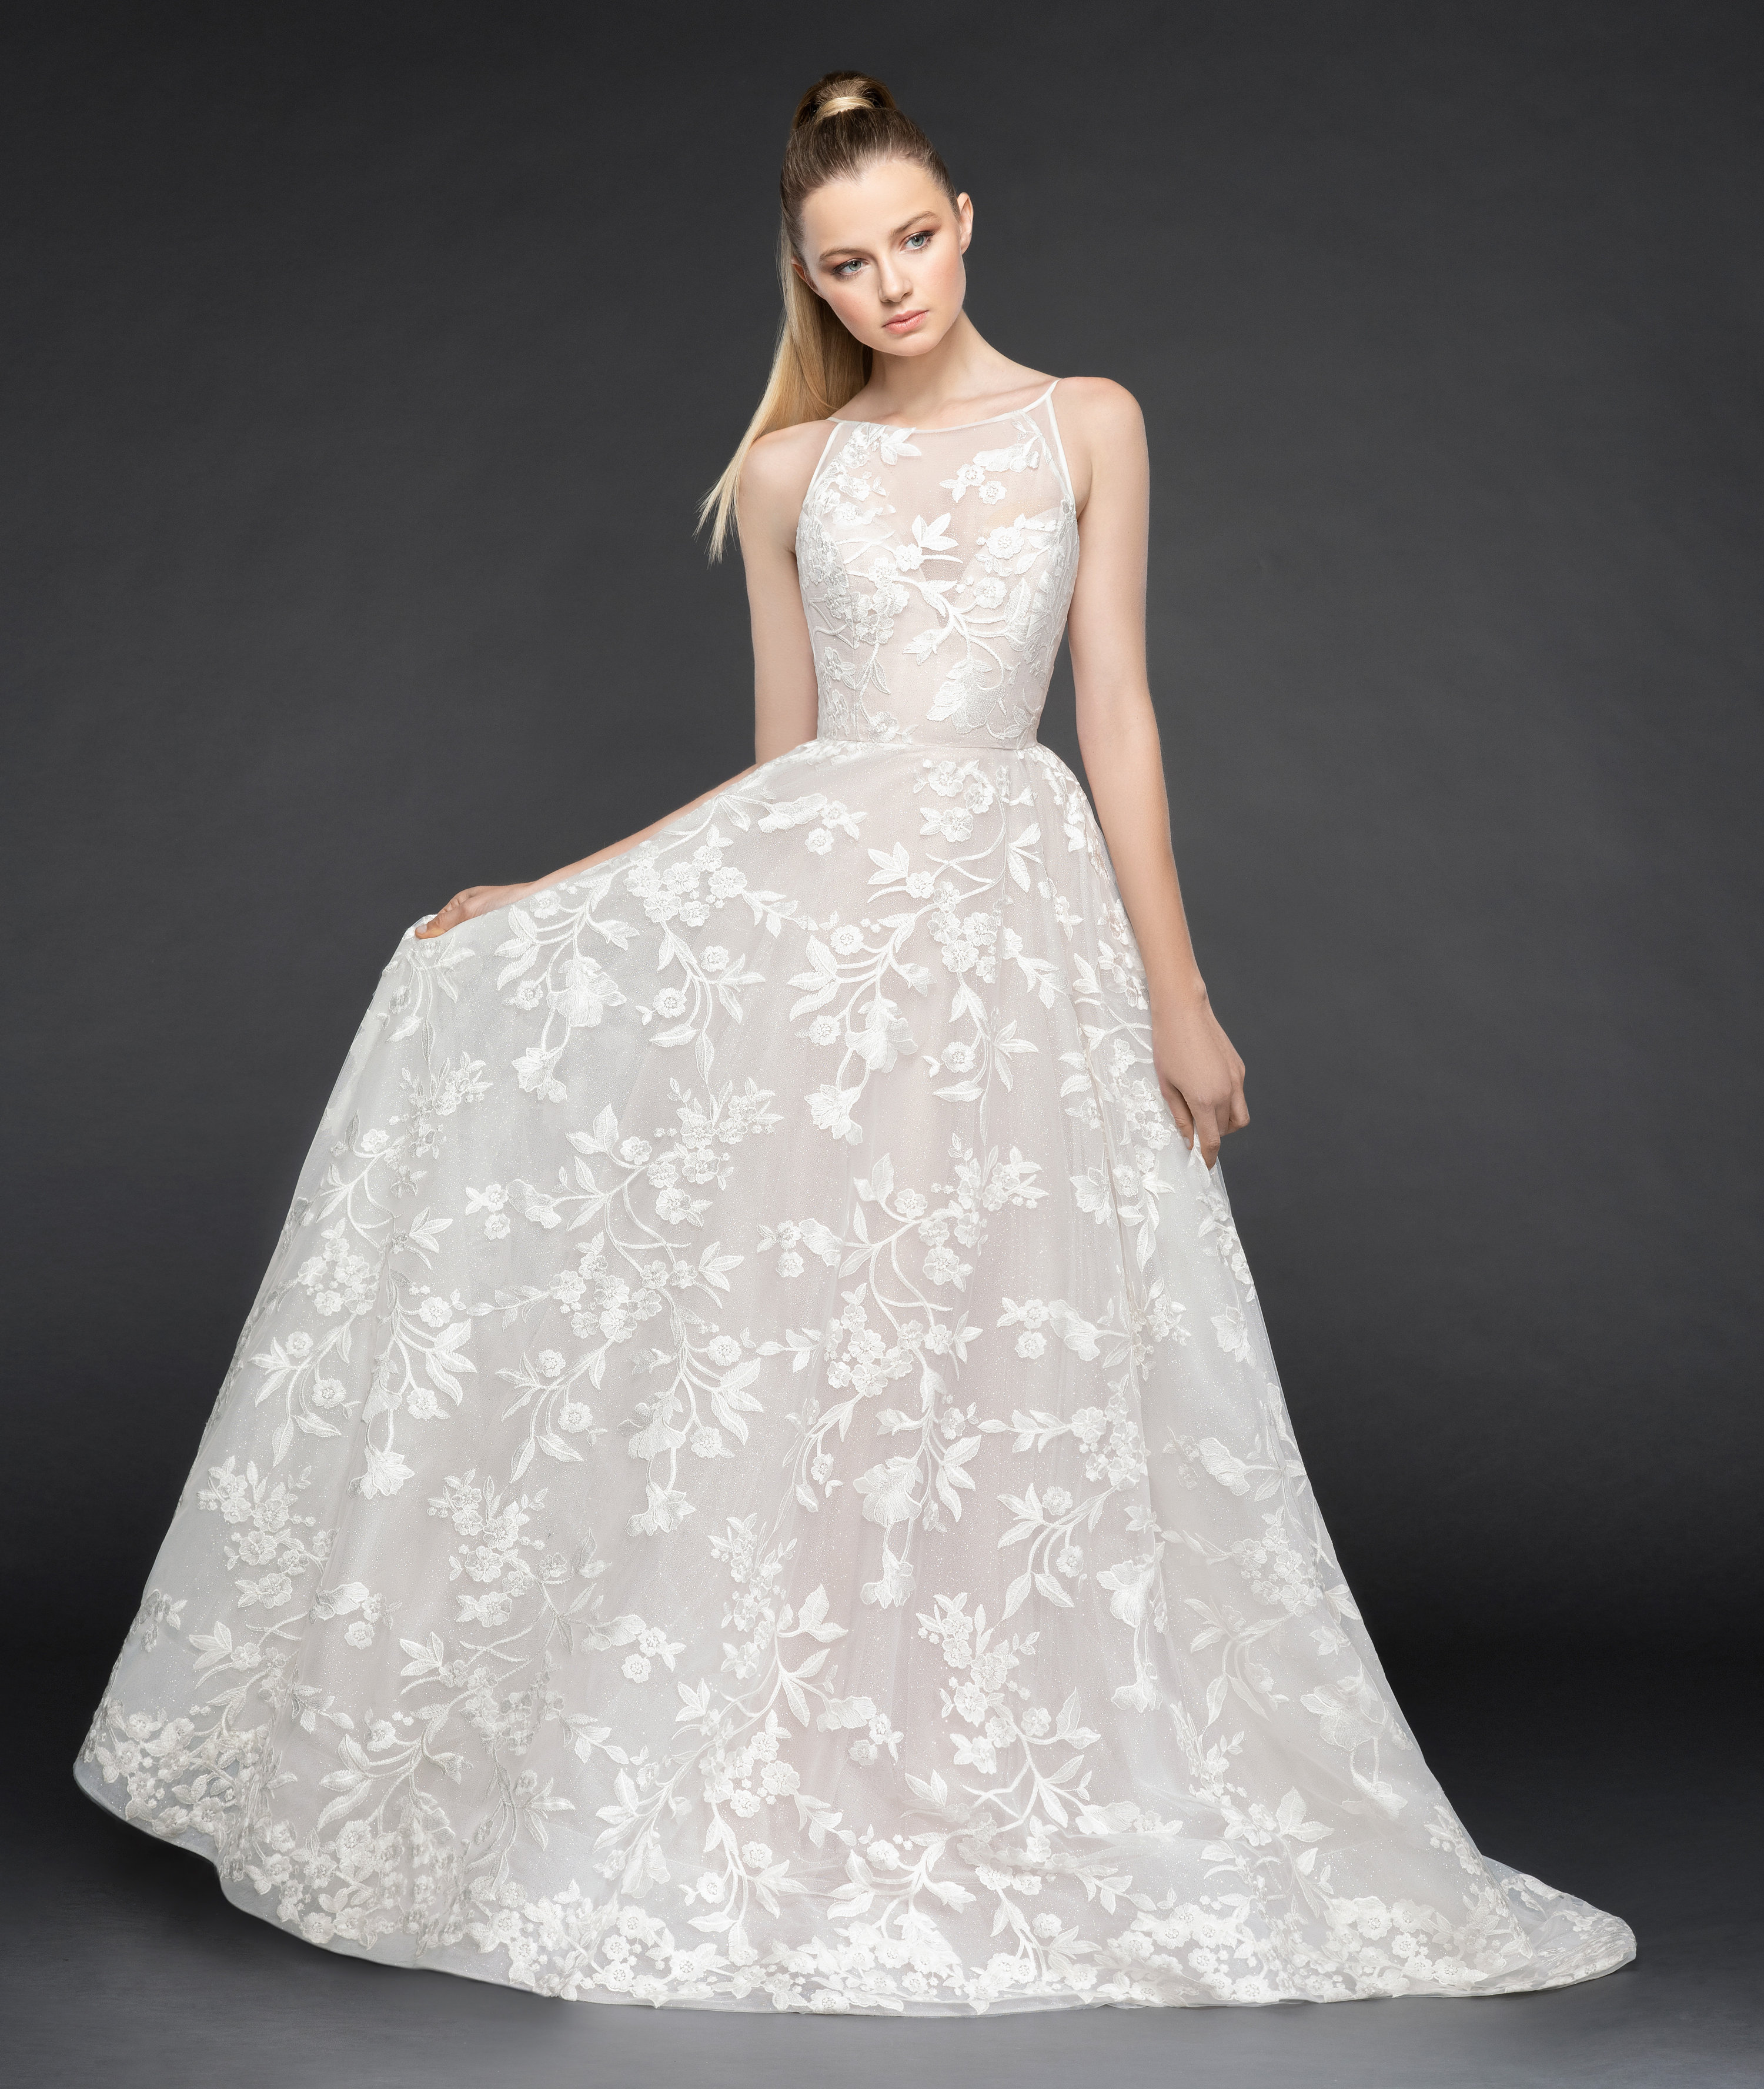 Bridal Gowns and Wedding Dresses by JLM Couture - Style 1859 Saige